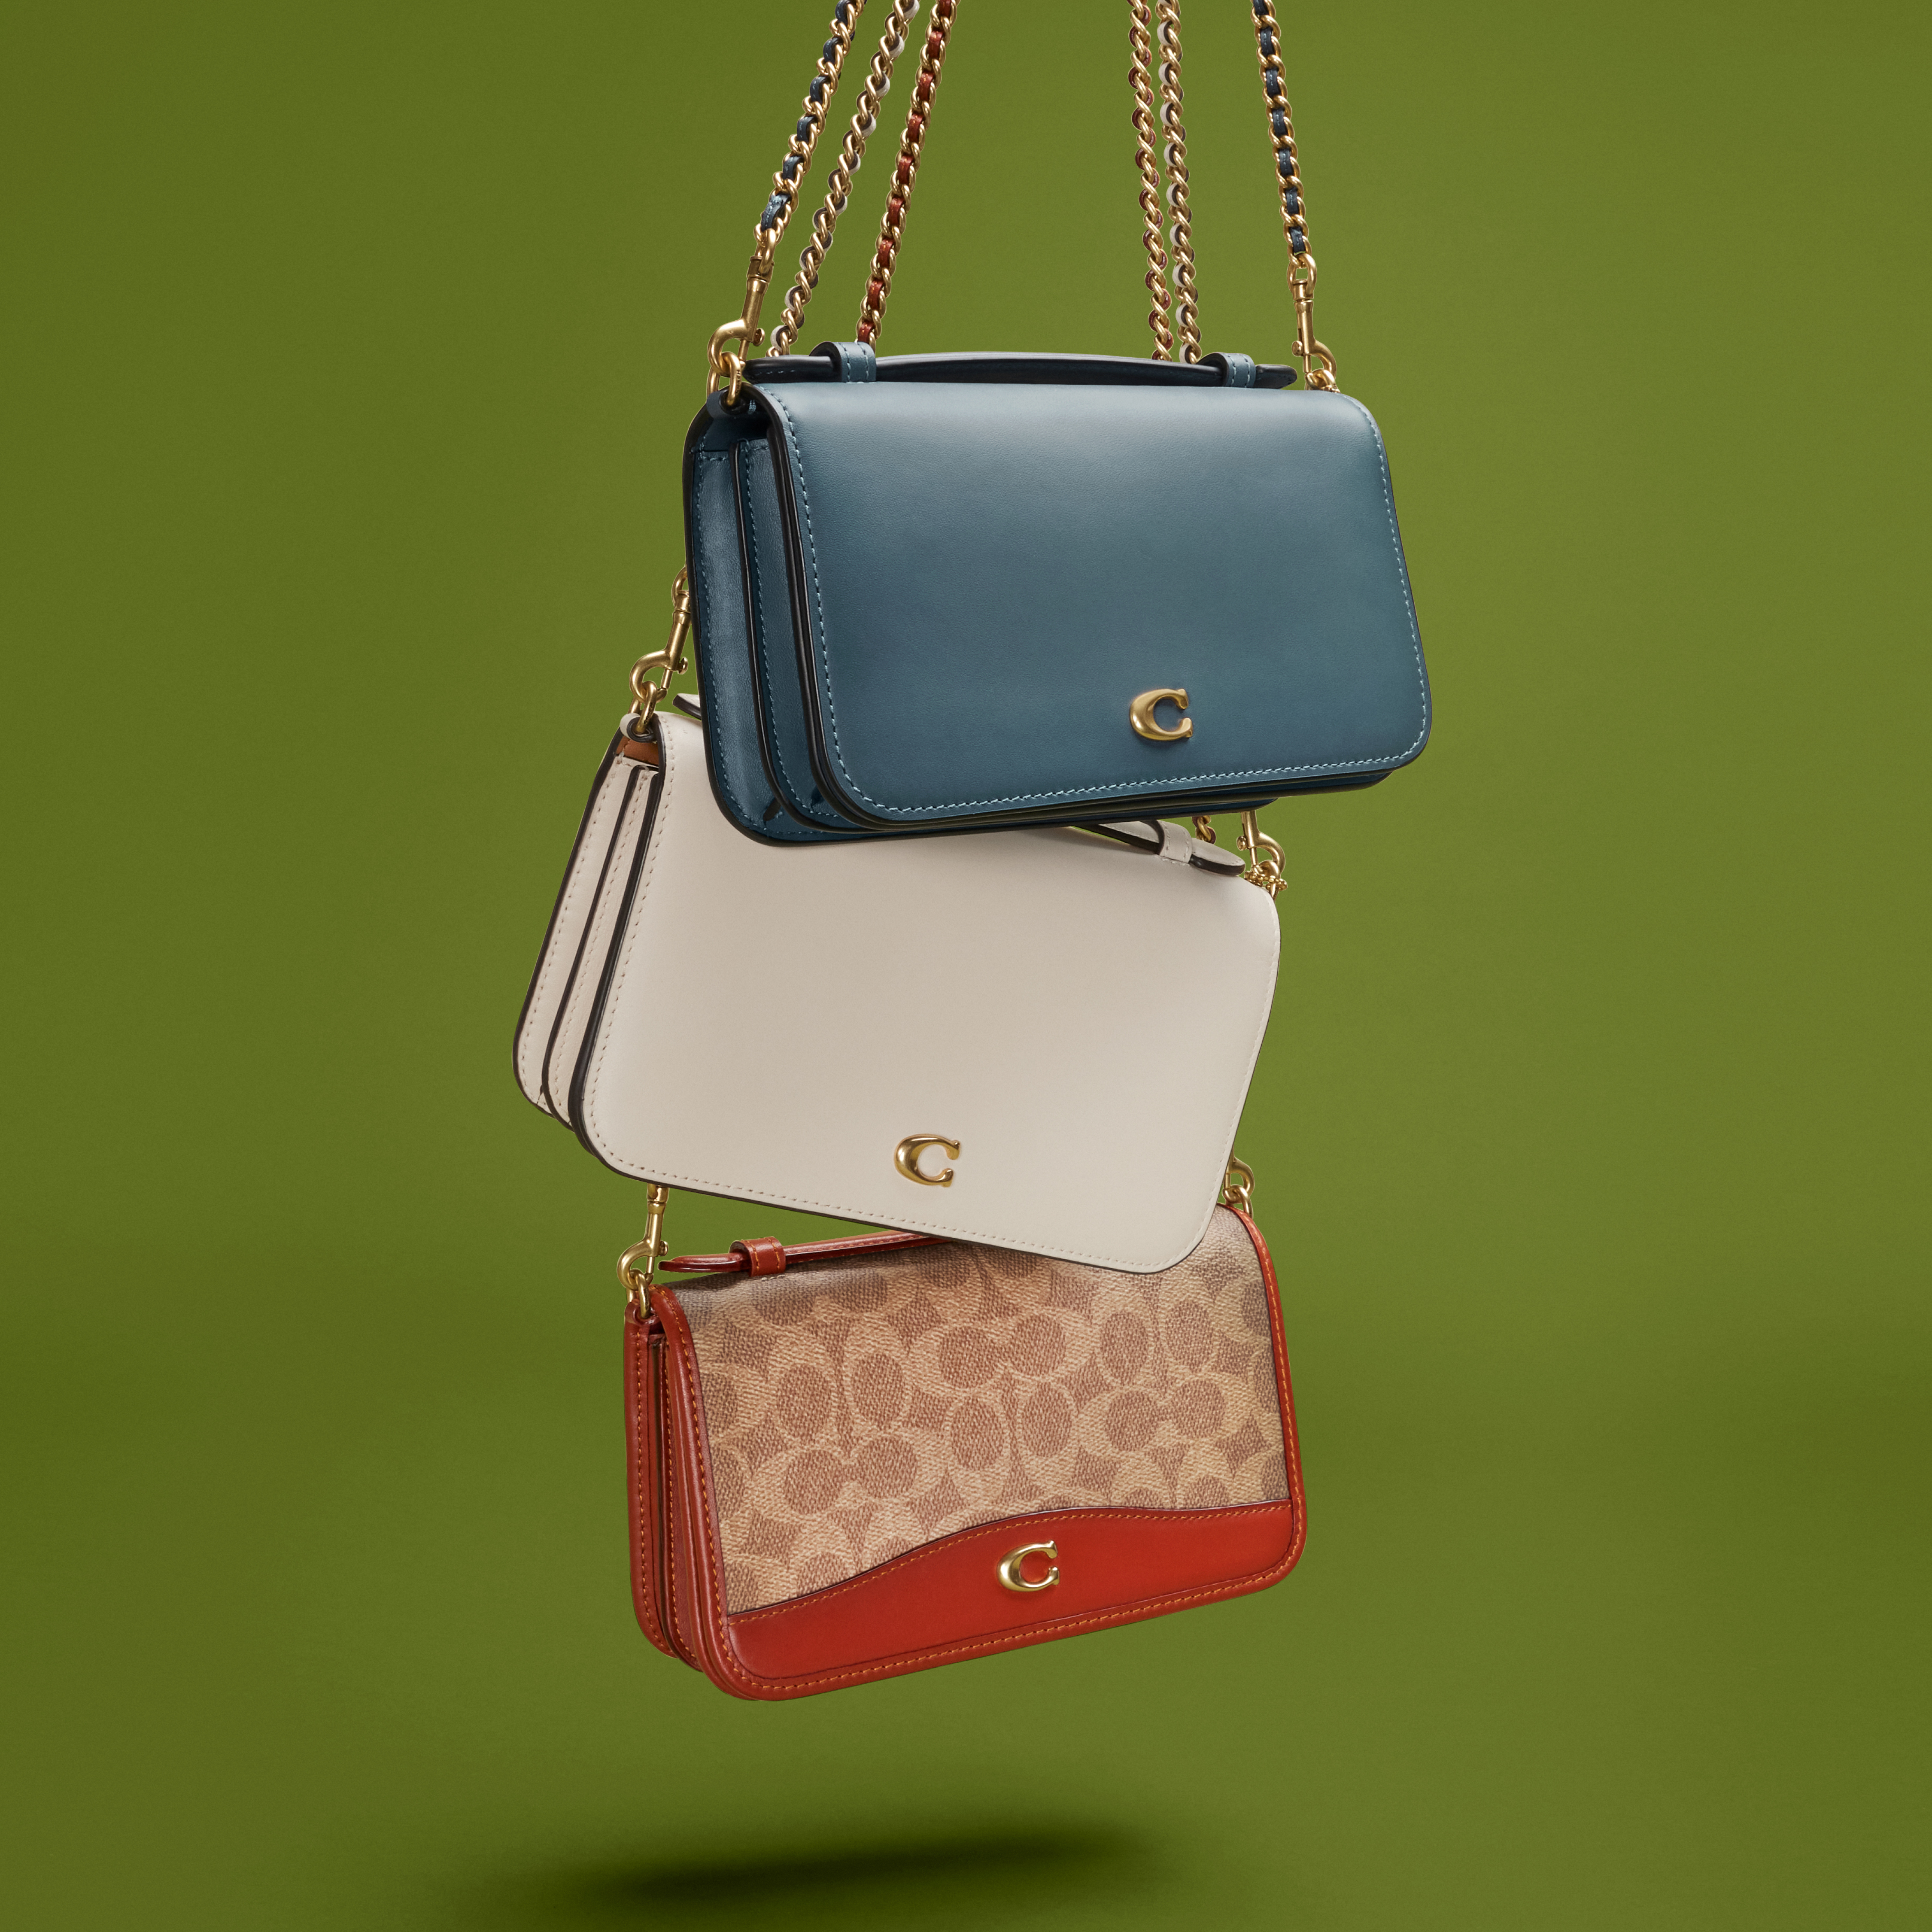 Gifting from Coach